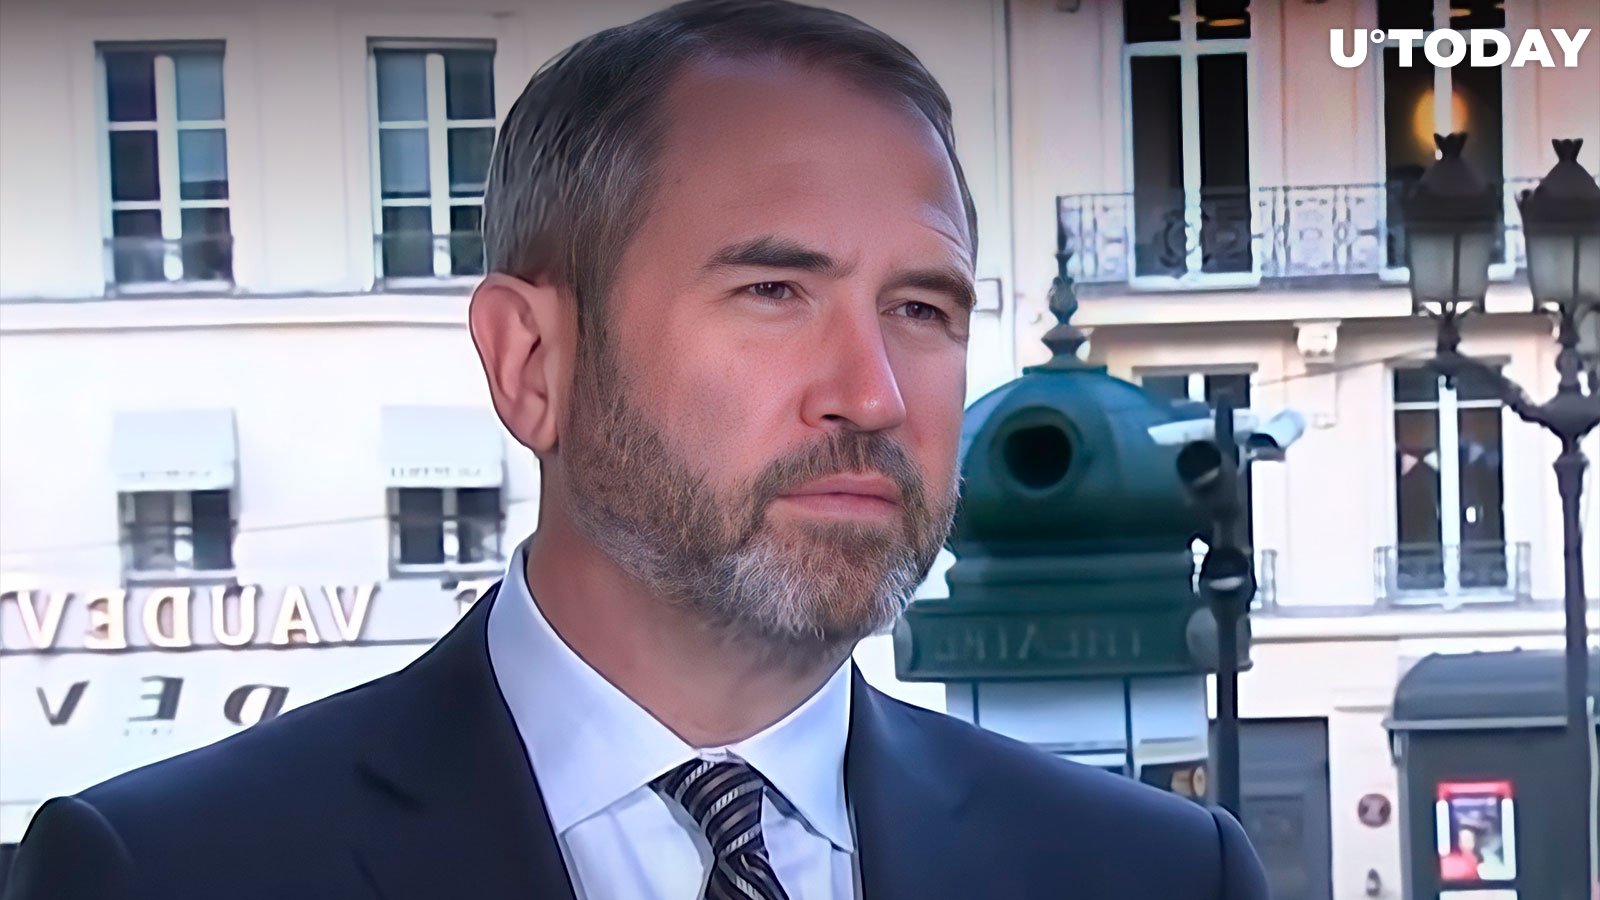 Ripple CEO Says SEC “Not Interested” in Applying Law After Filing Motion for Summary Judgement